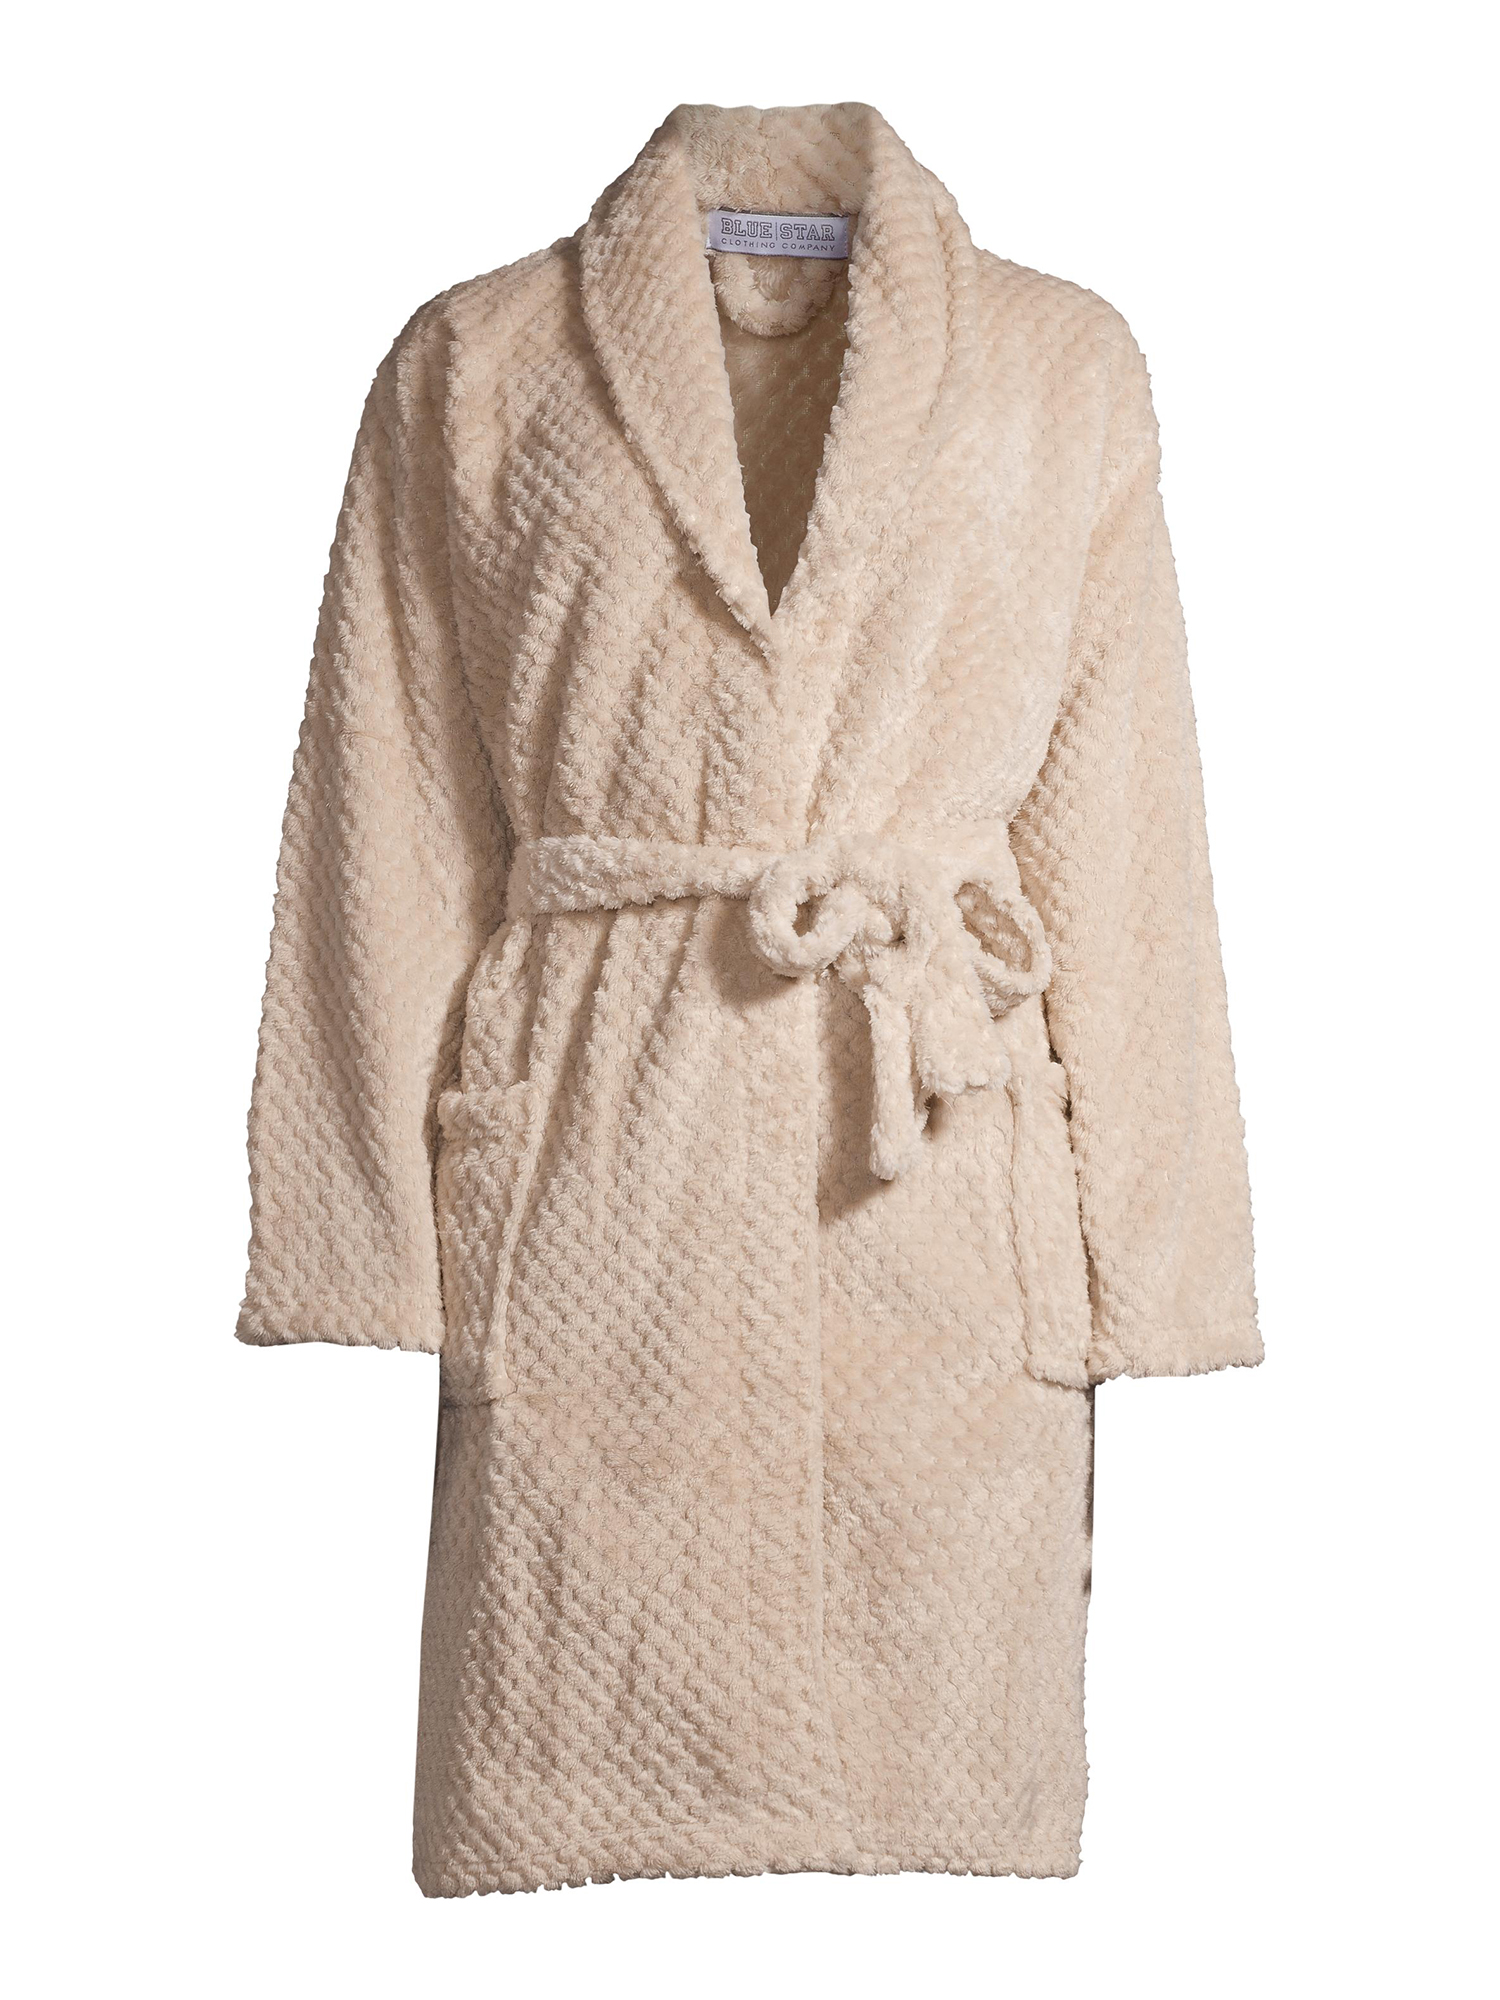 The Cozy Corner Club Durable Easy Care Textured Evening Robe (Women's), 1 Pack - image 6 of 7